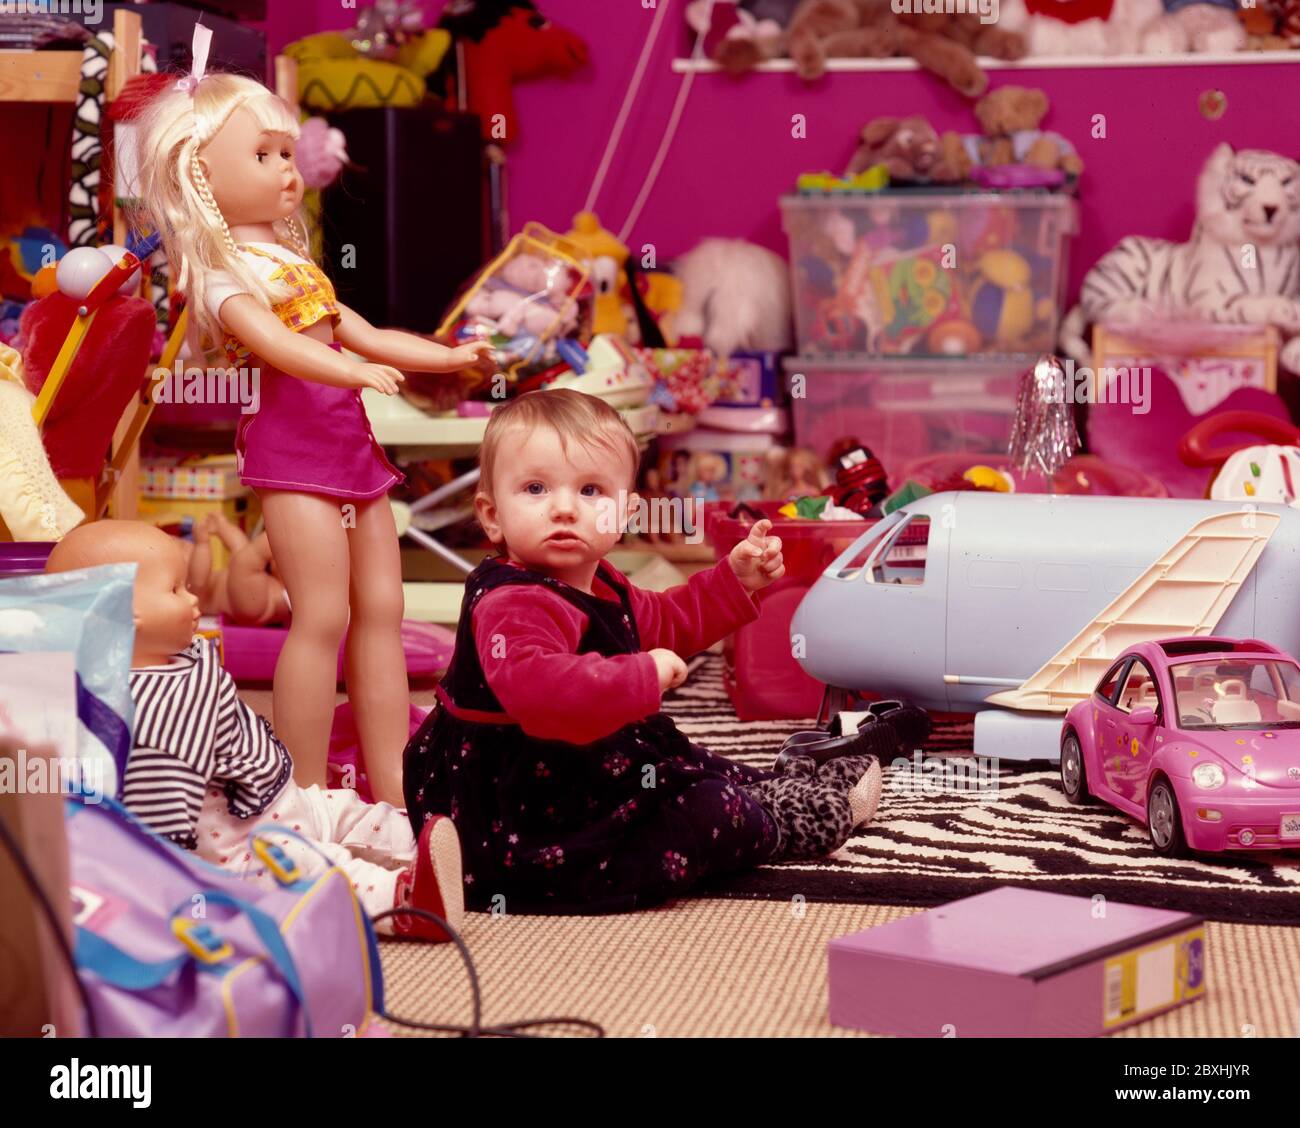 One year old baby in playroom surrounded by toys Stock Photo